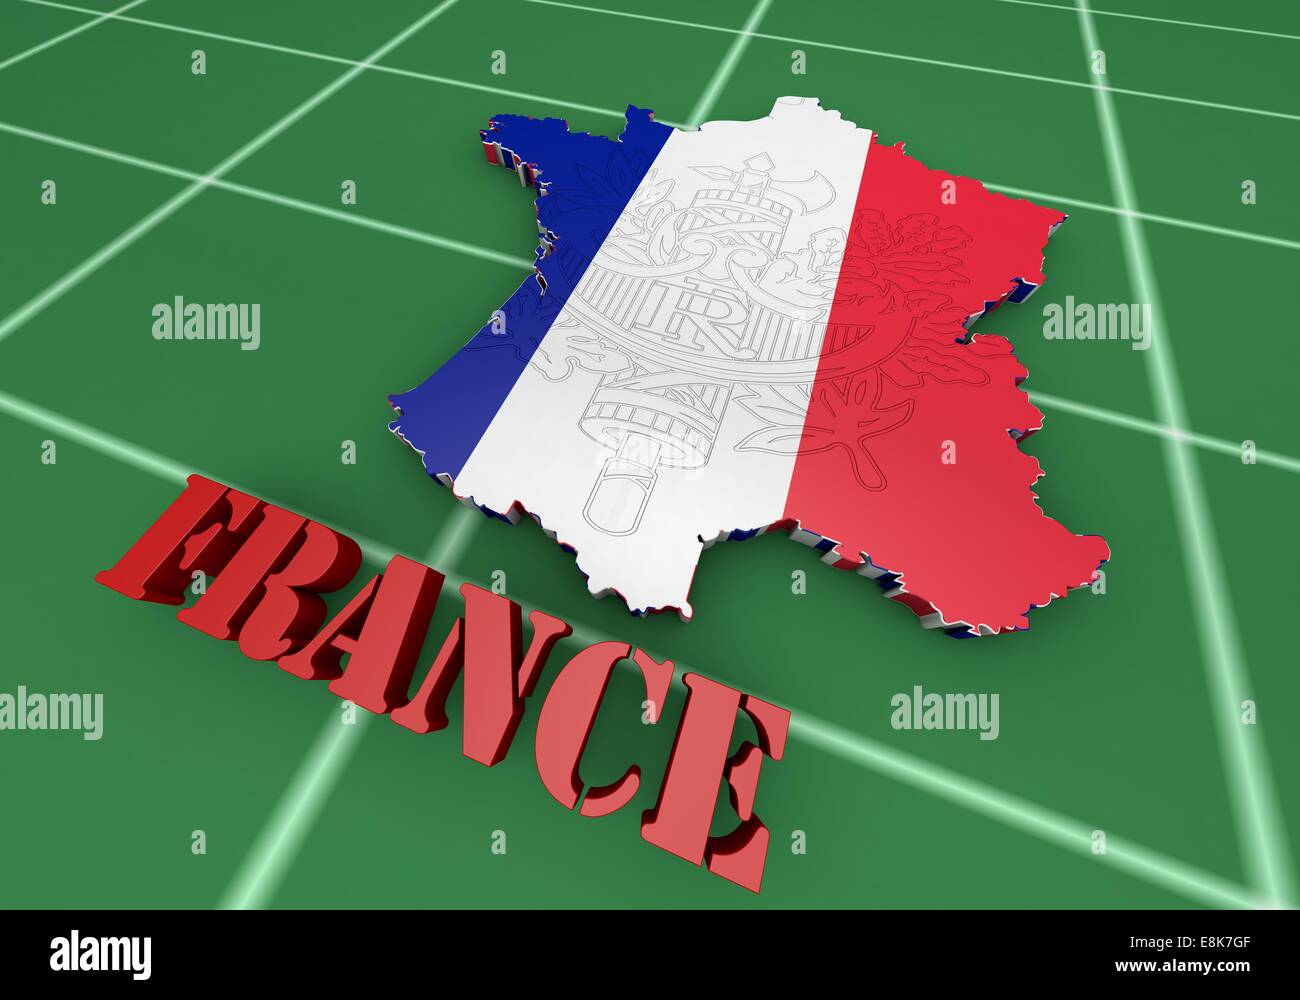 Map of France with flag colors. 3d render illustration. Stock Photo